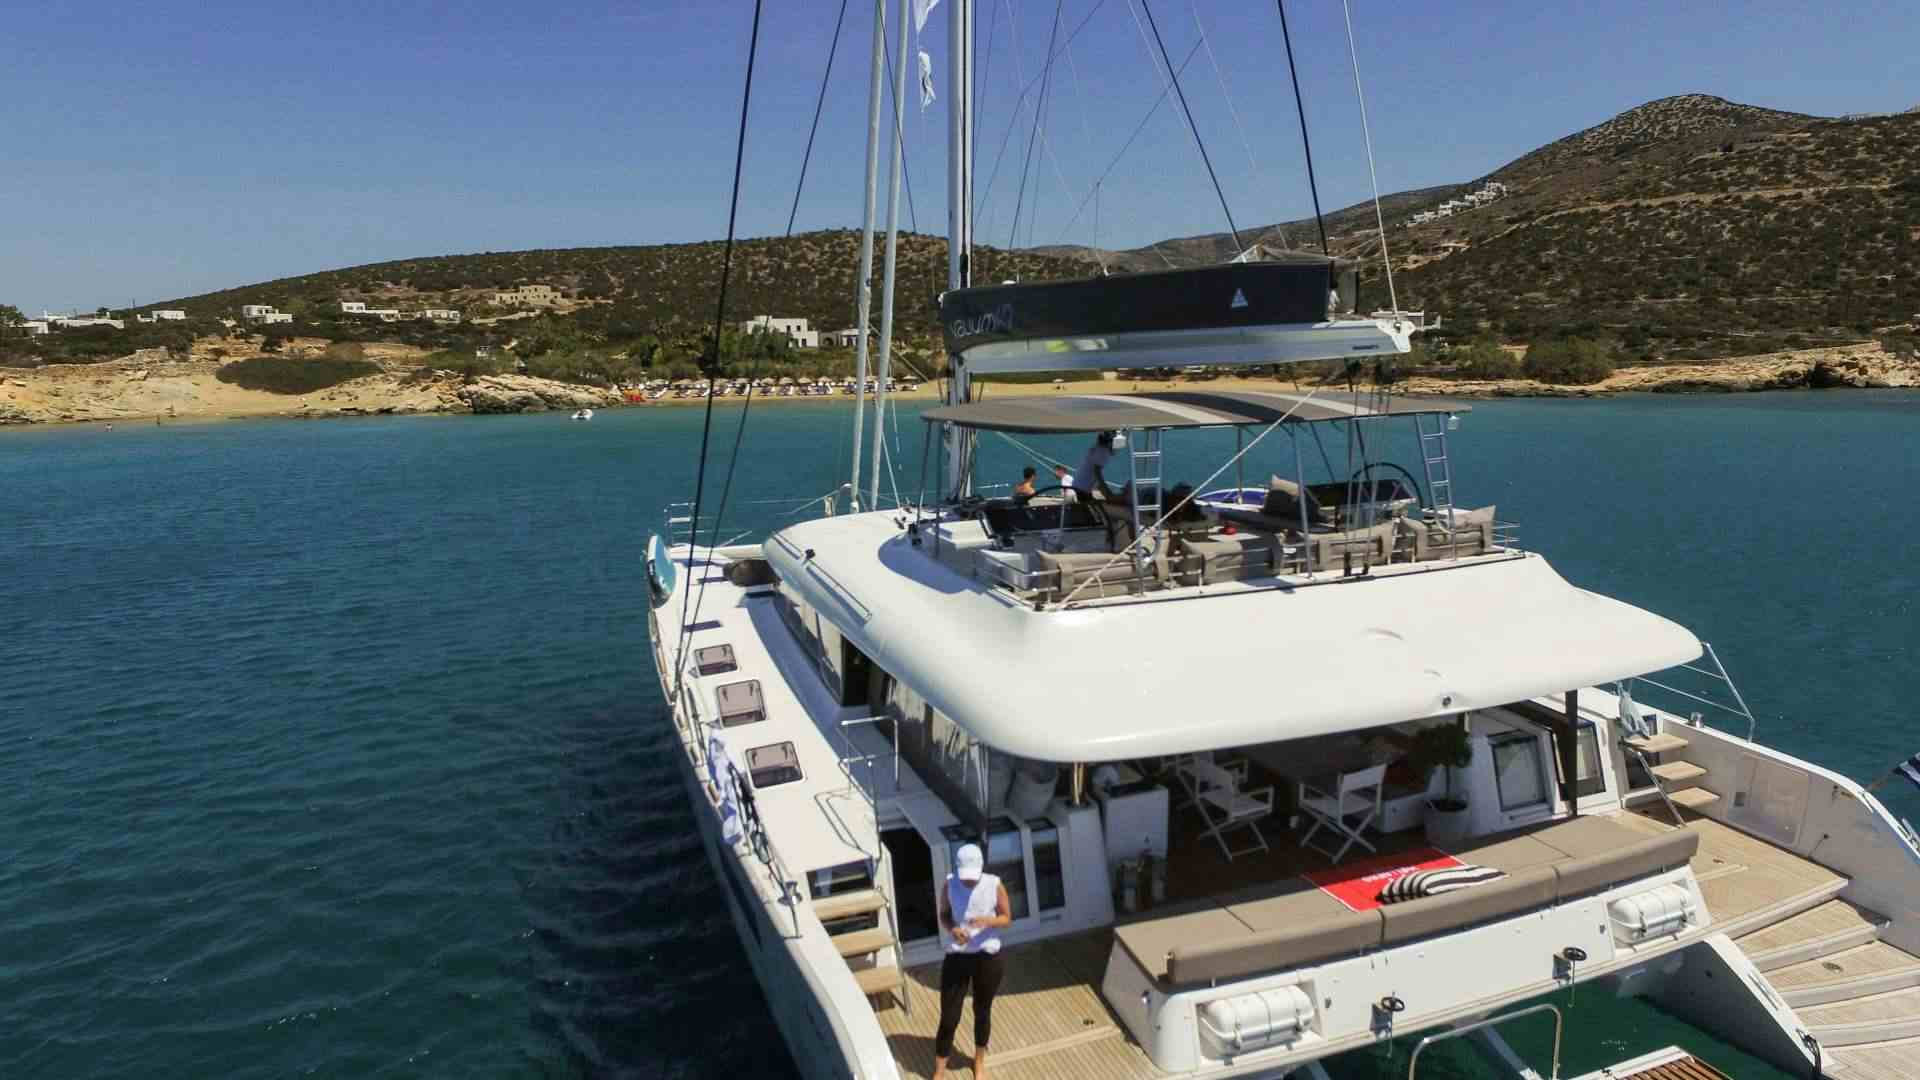 valium62 - Yacht Charter Rhodes & Boat hire in Greece 1